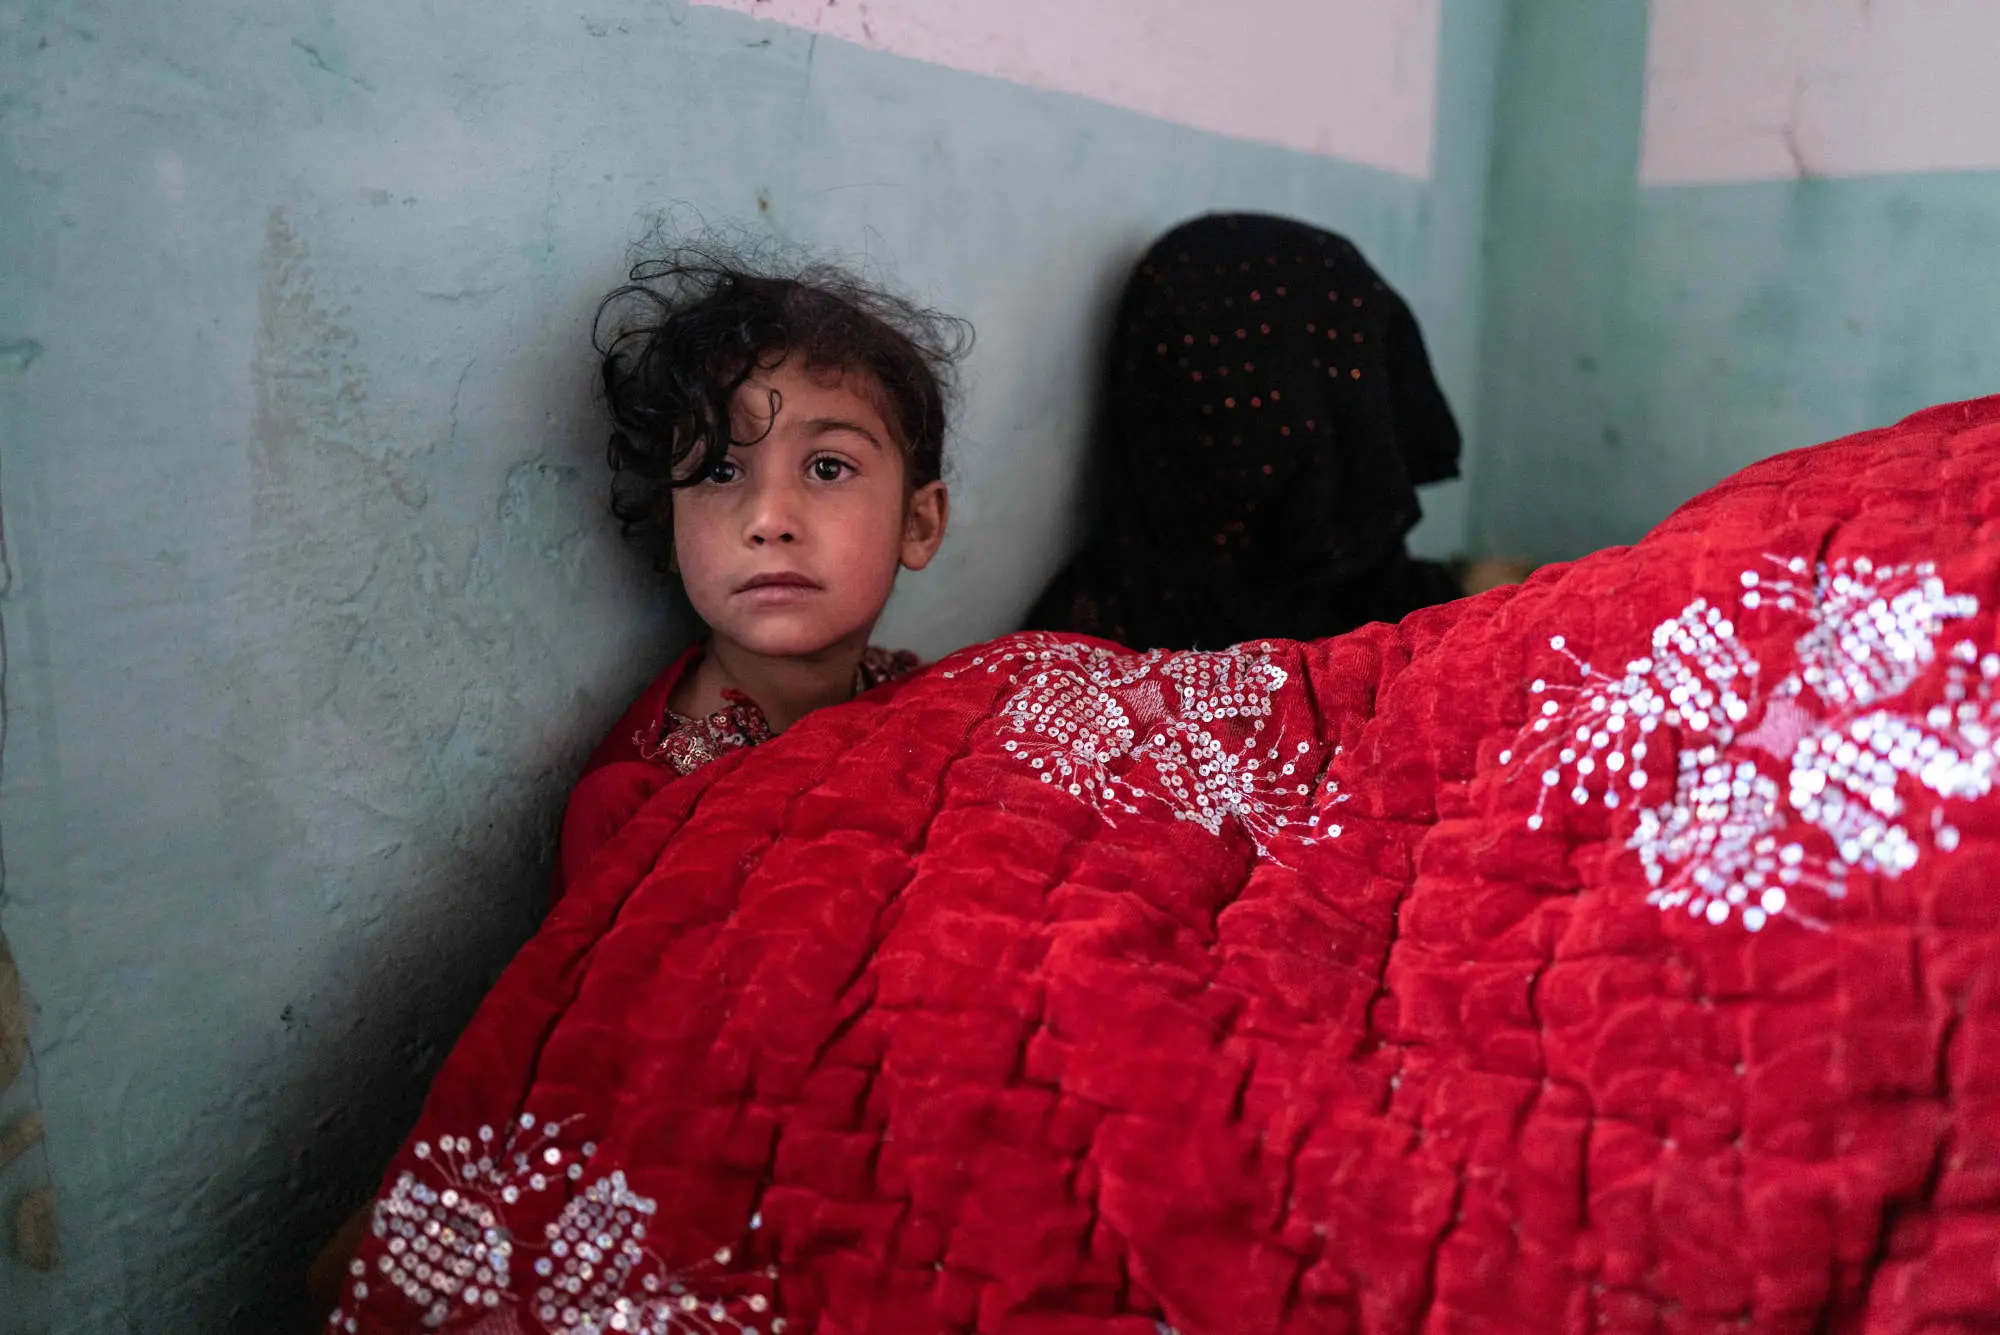 A young girl sits below blankets